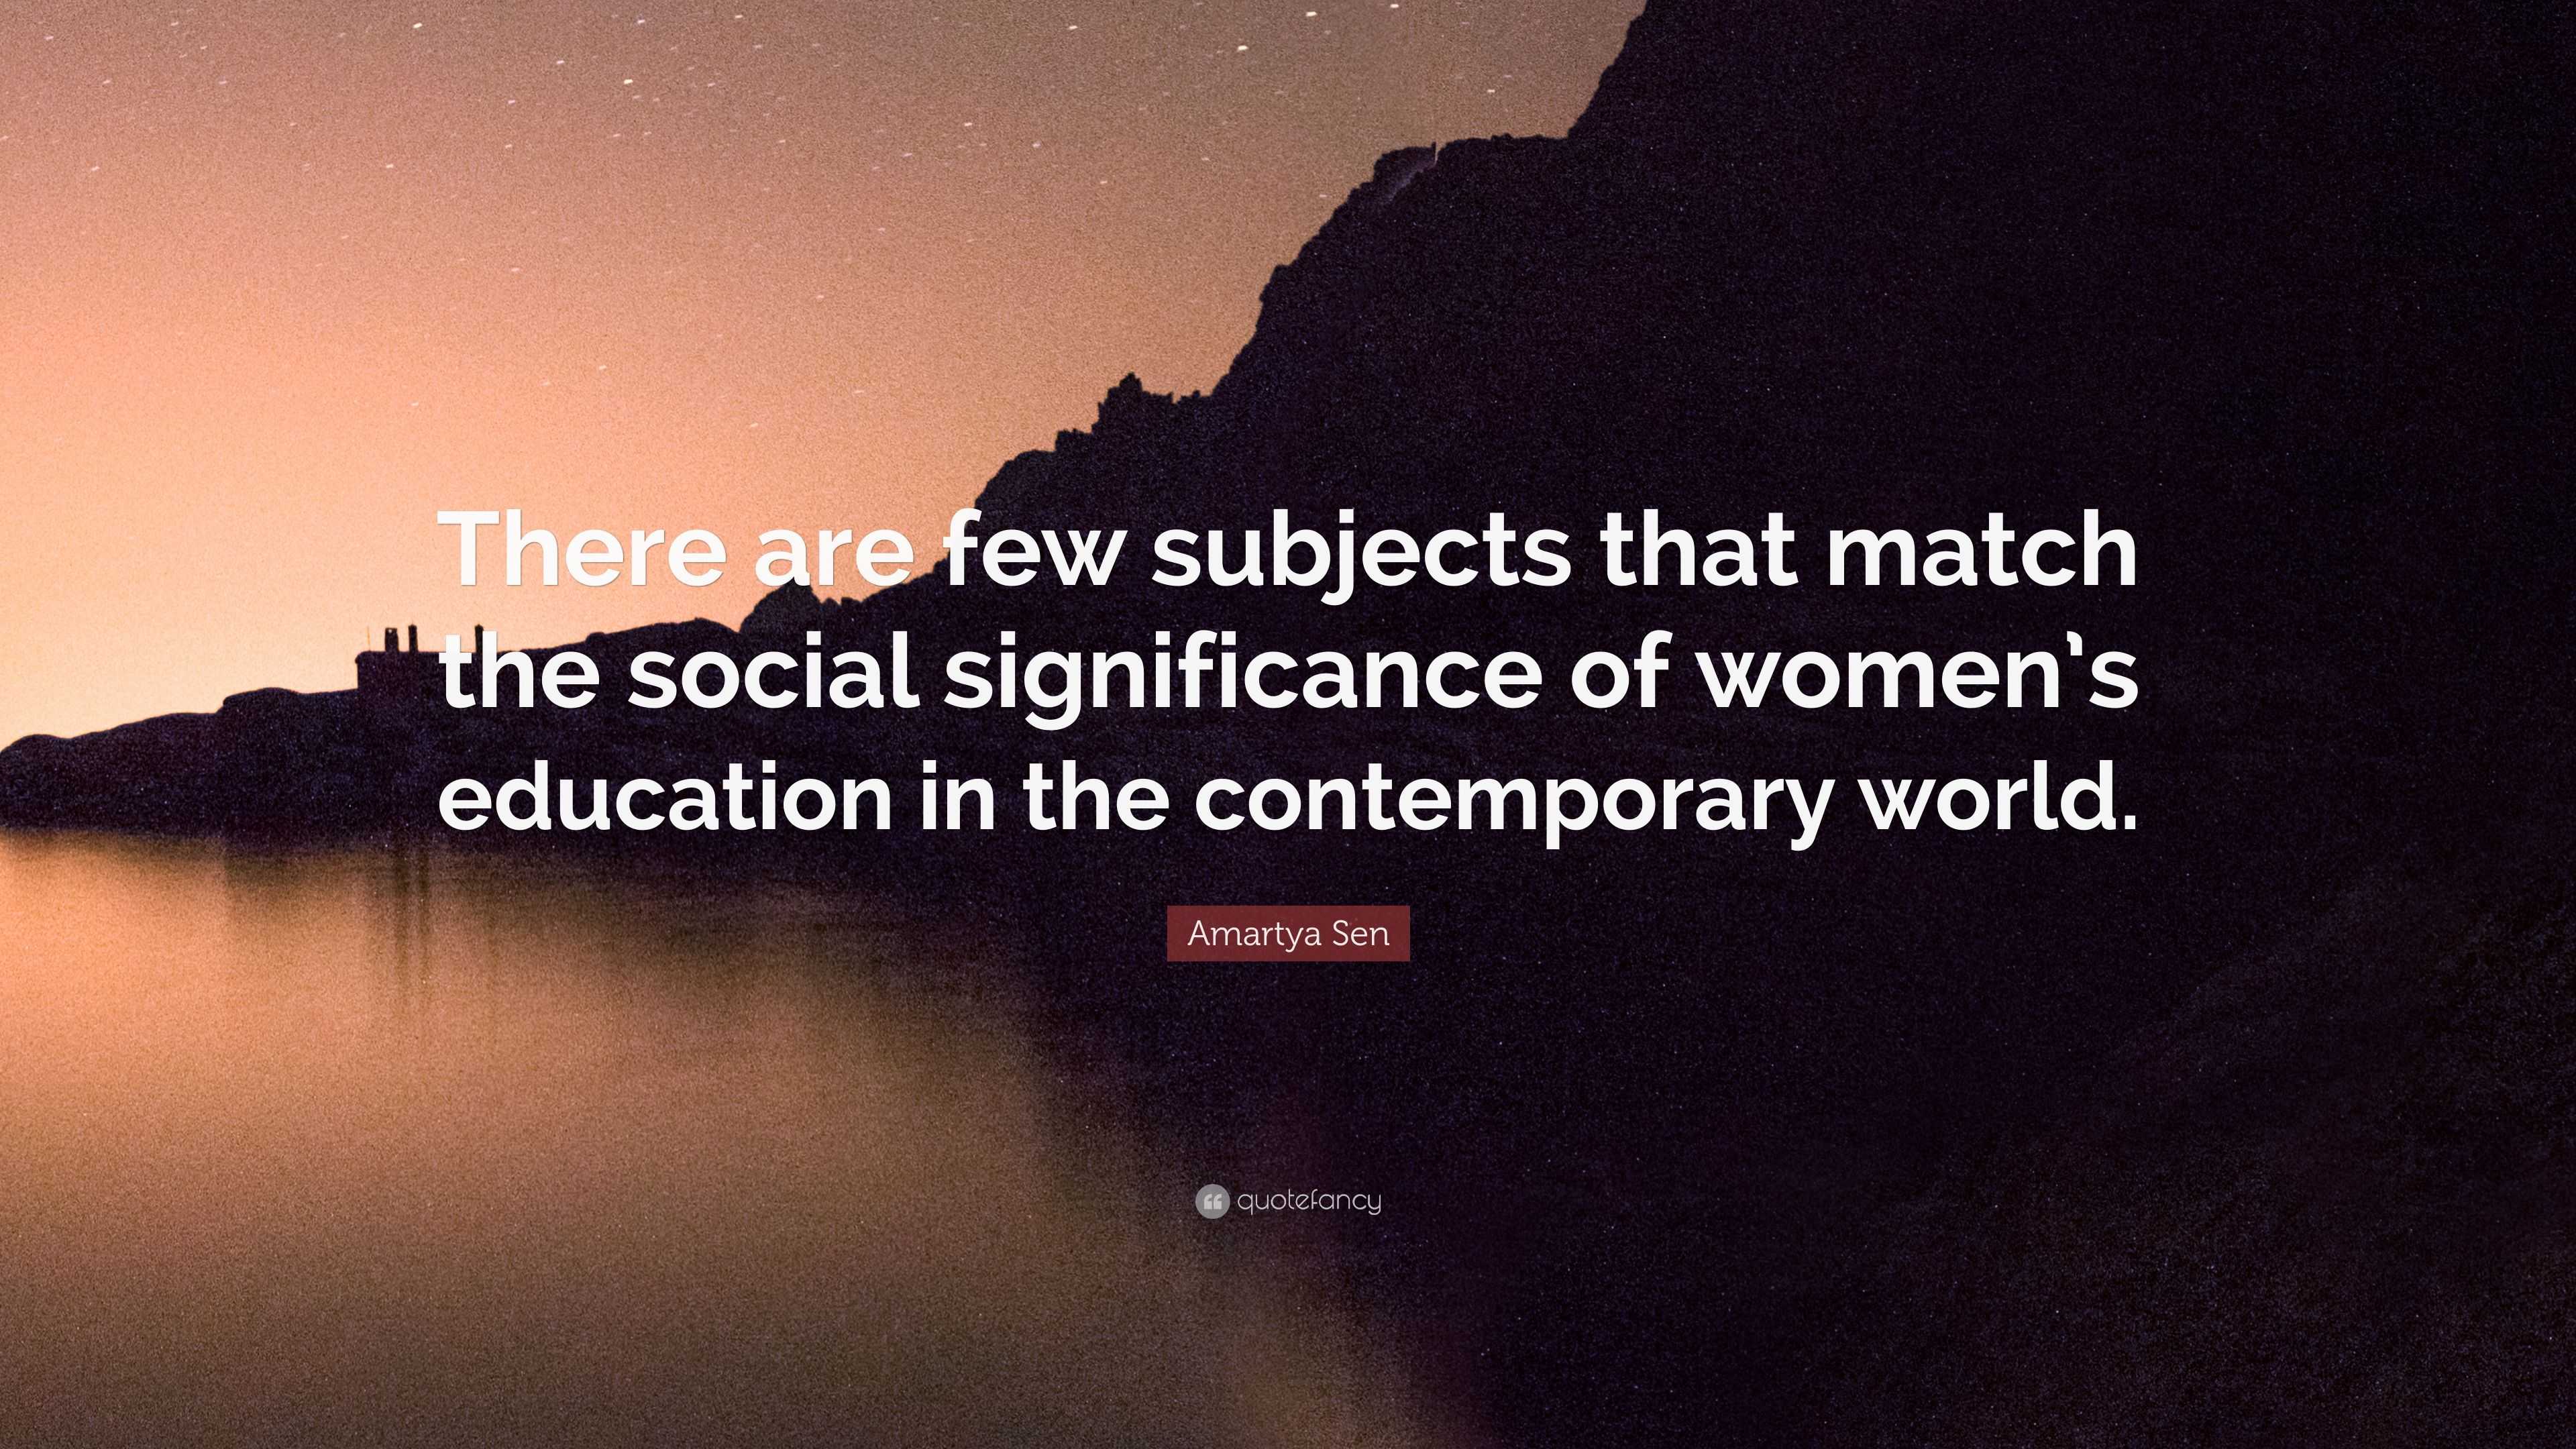 Amartya Sen Quote There Are Few Subjects That Match The Social Significance Of Women S Education In